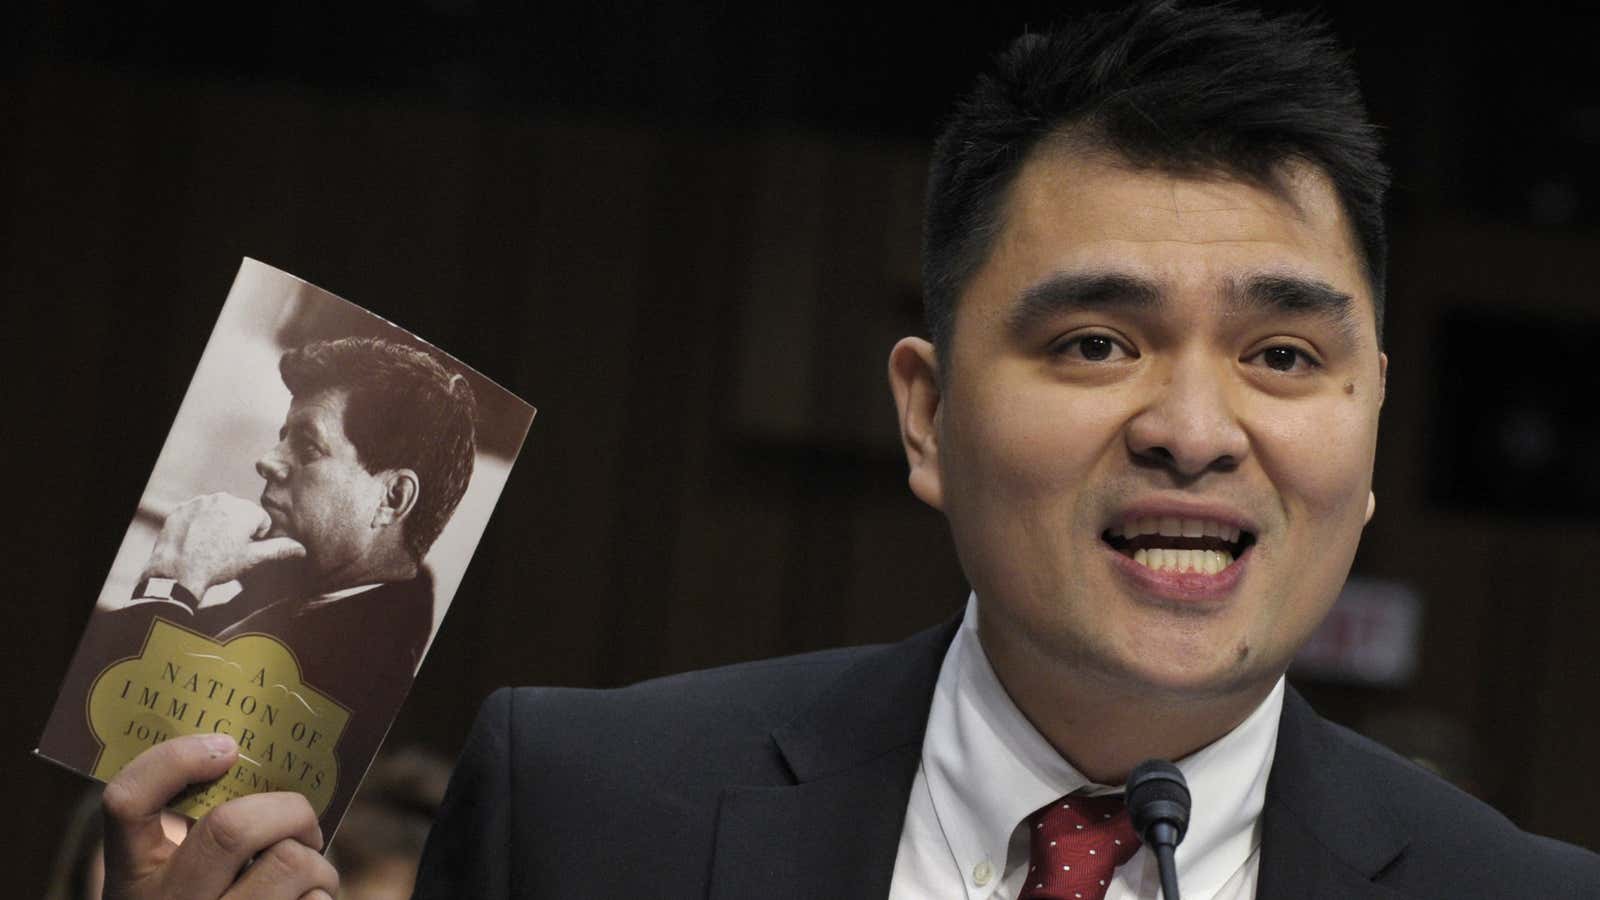 Jose Antonio Vargas turned 30 months before the Obama administration made that the cutoff for a youth amnesty program.